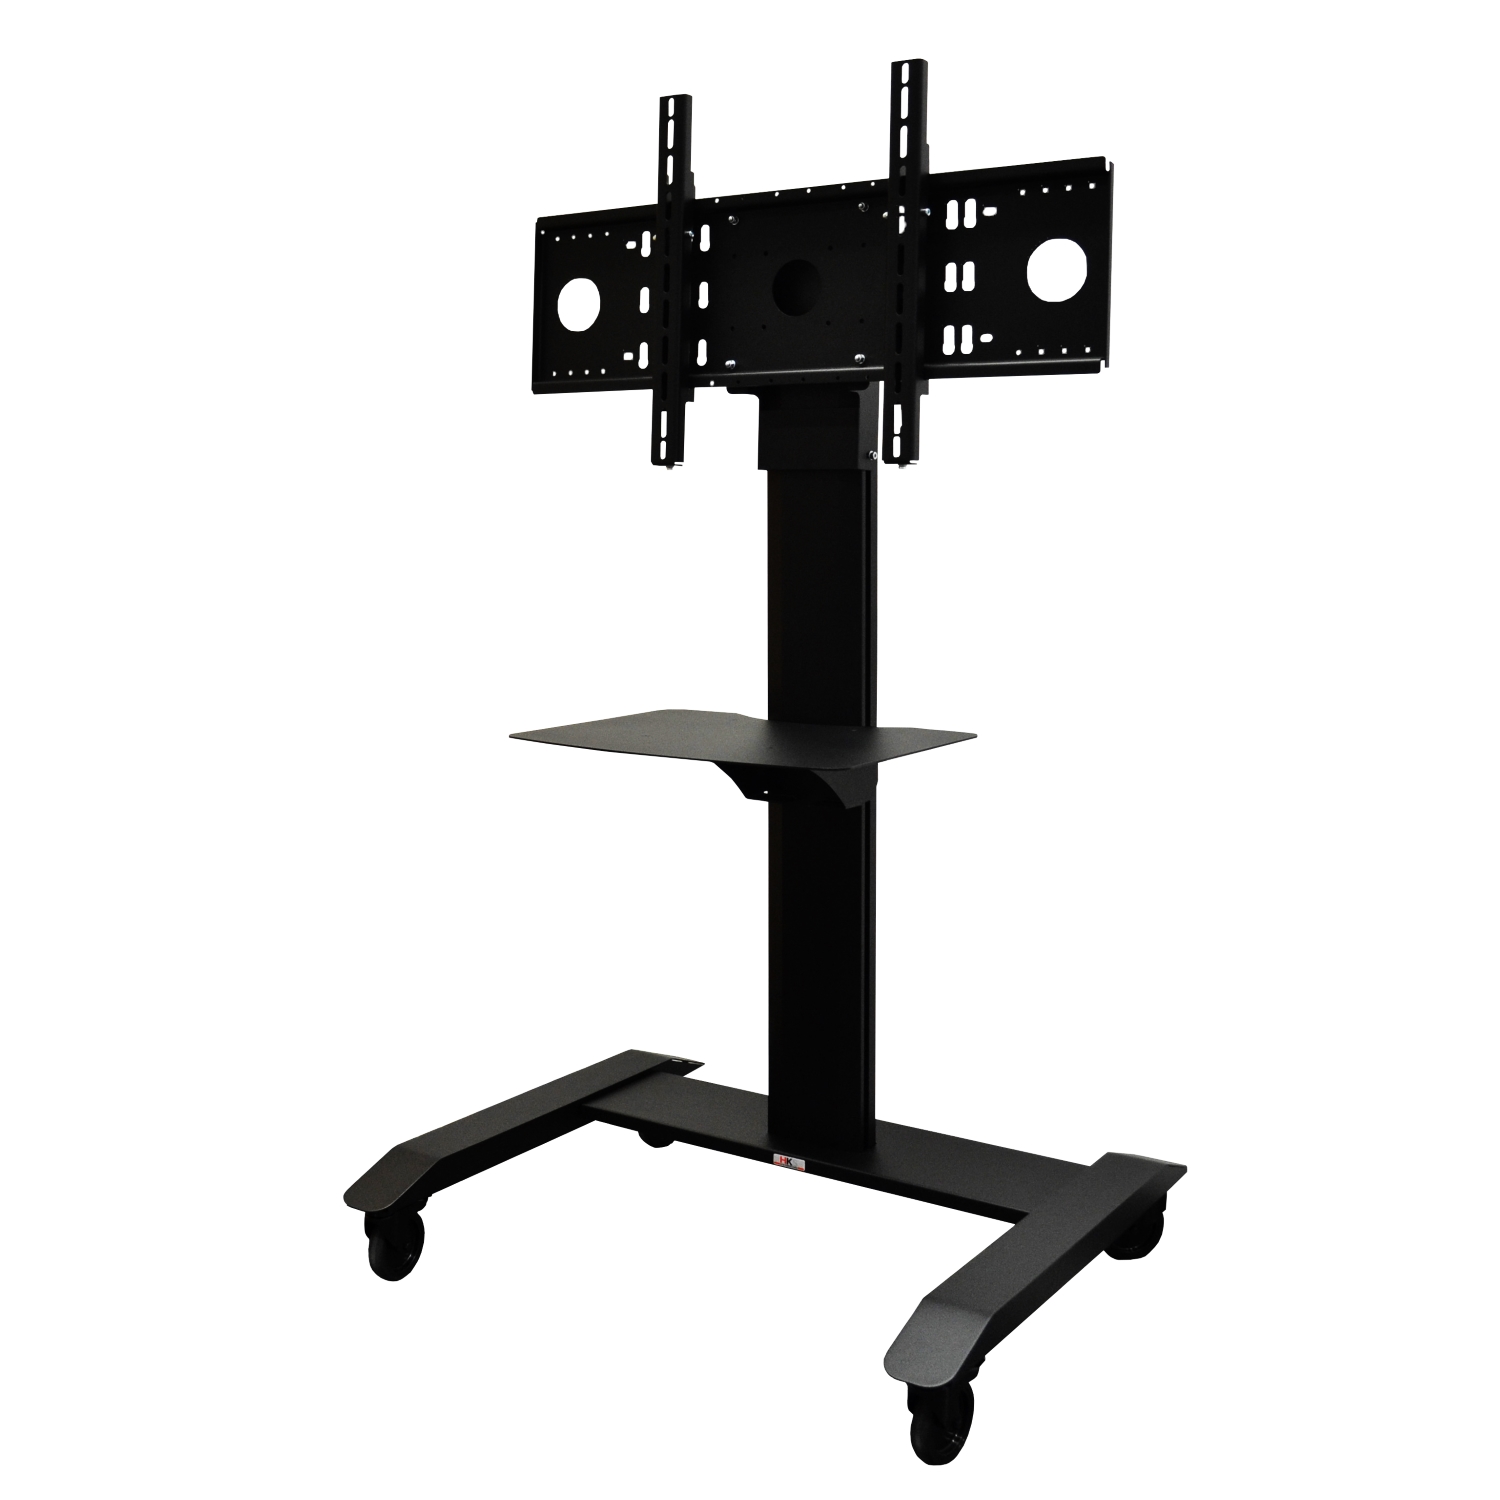 Display roll stand VST-F